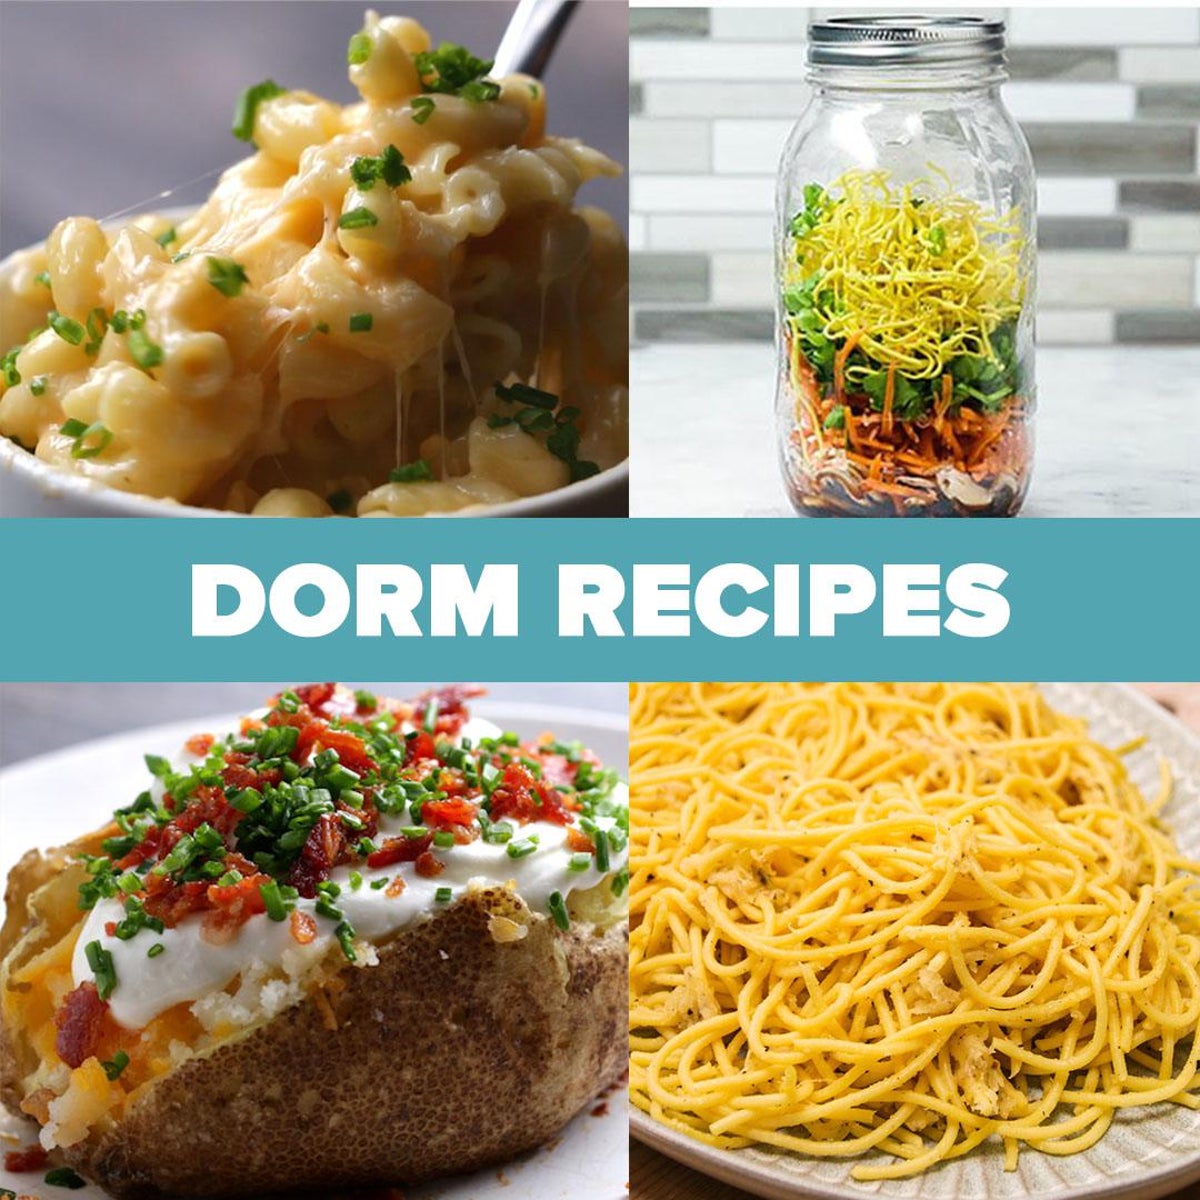 5 Easy College Meals to Make in Your Dorm Room - Collegeboxes